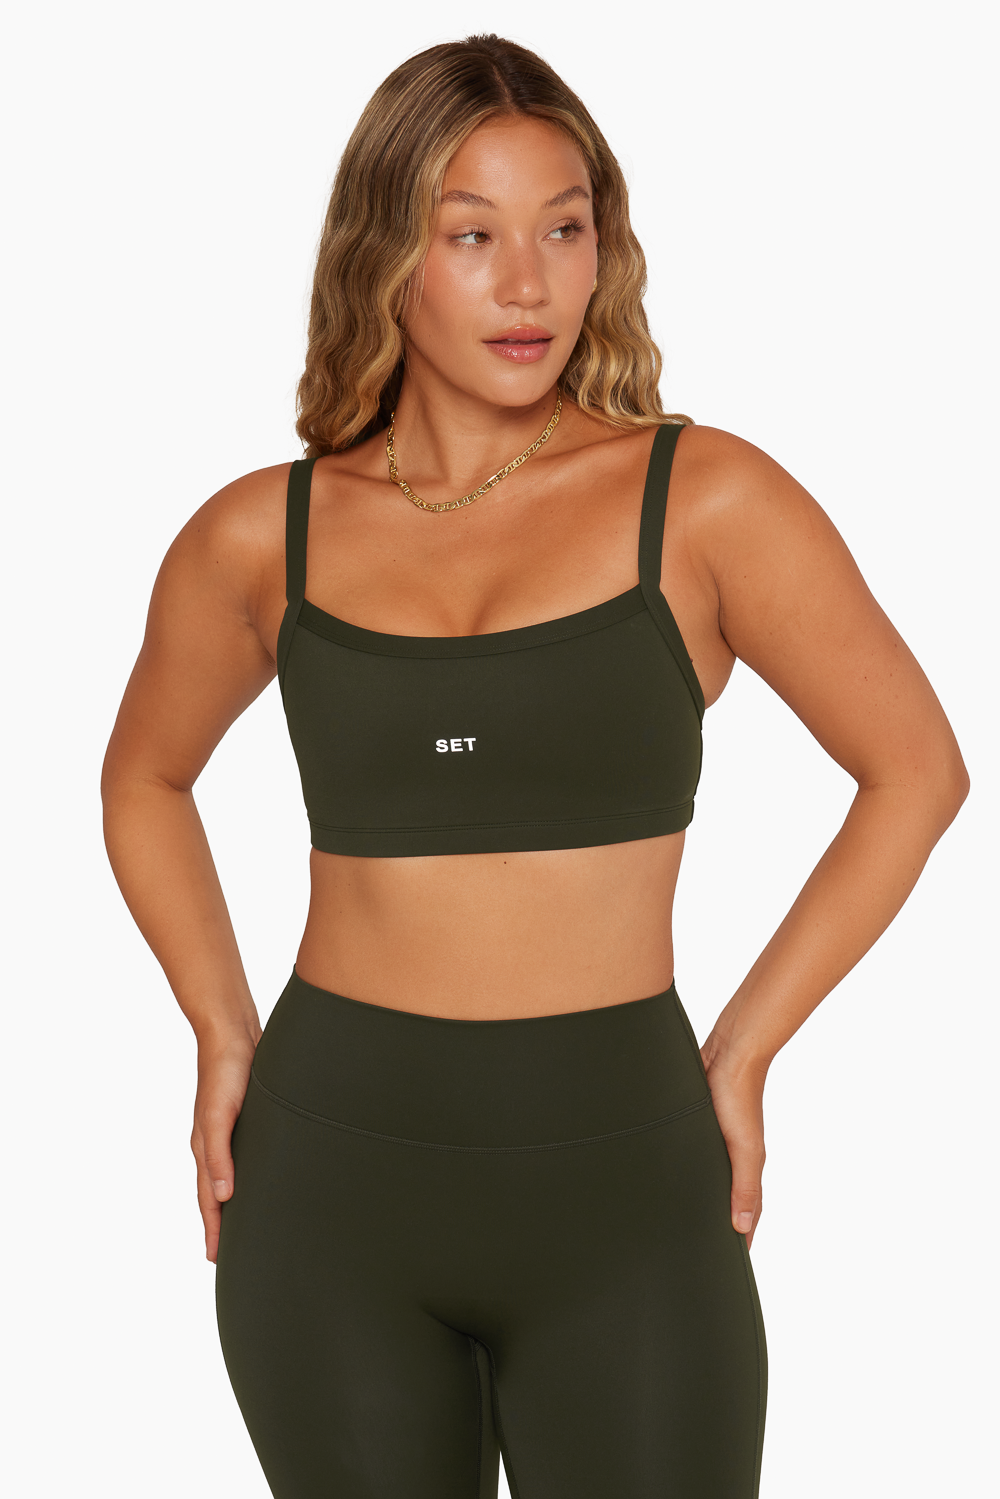 SPORTBODY® SCOOP BRA - AFTER HOURS Featured Image